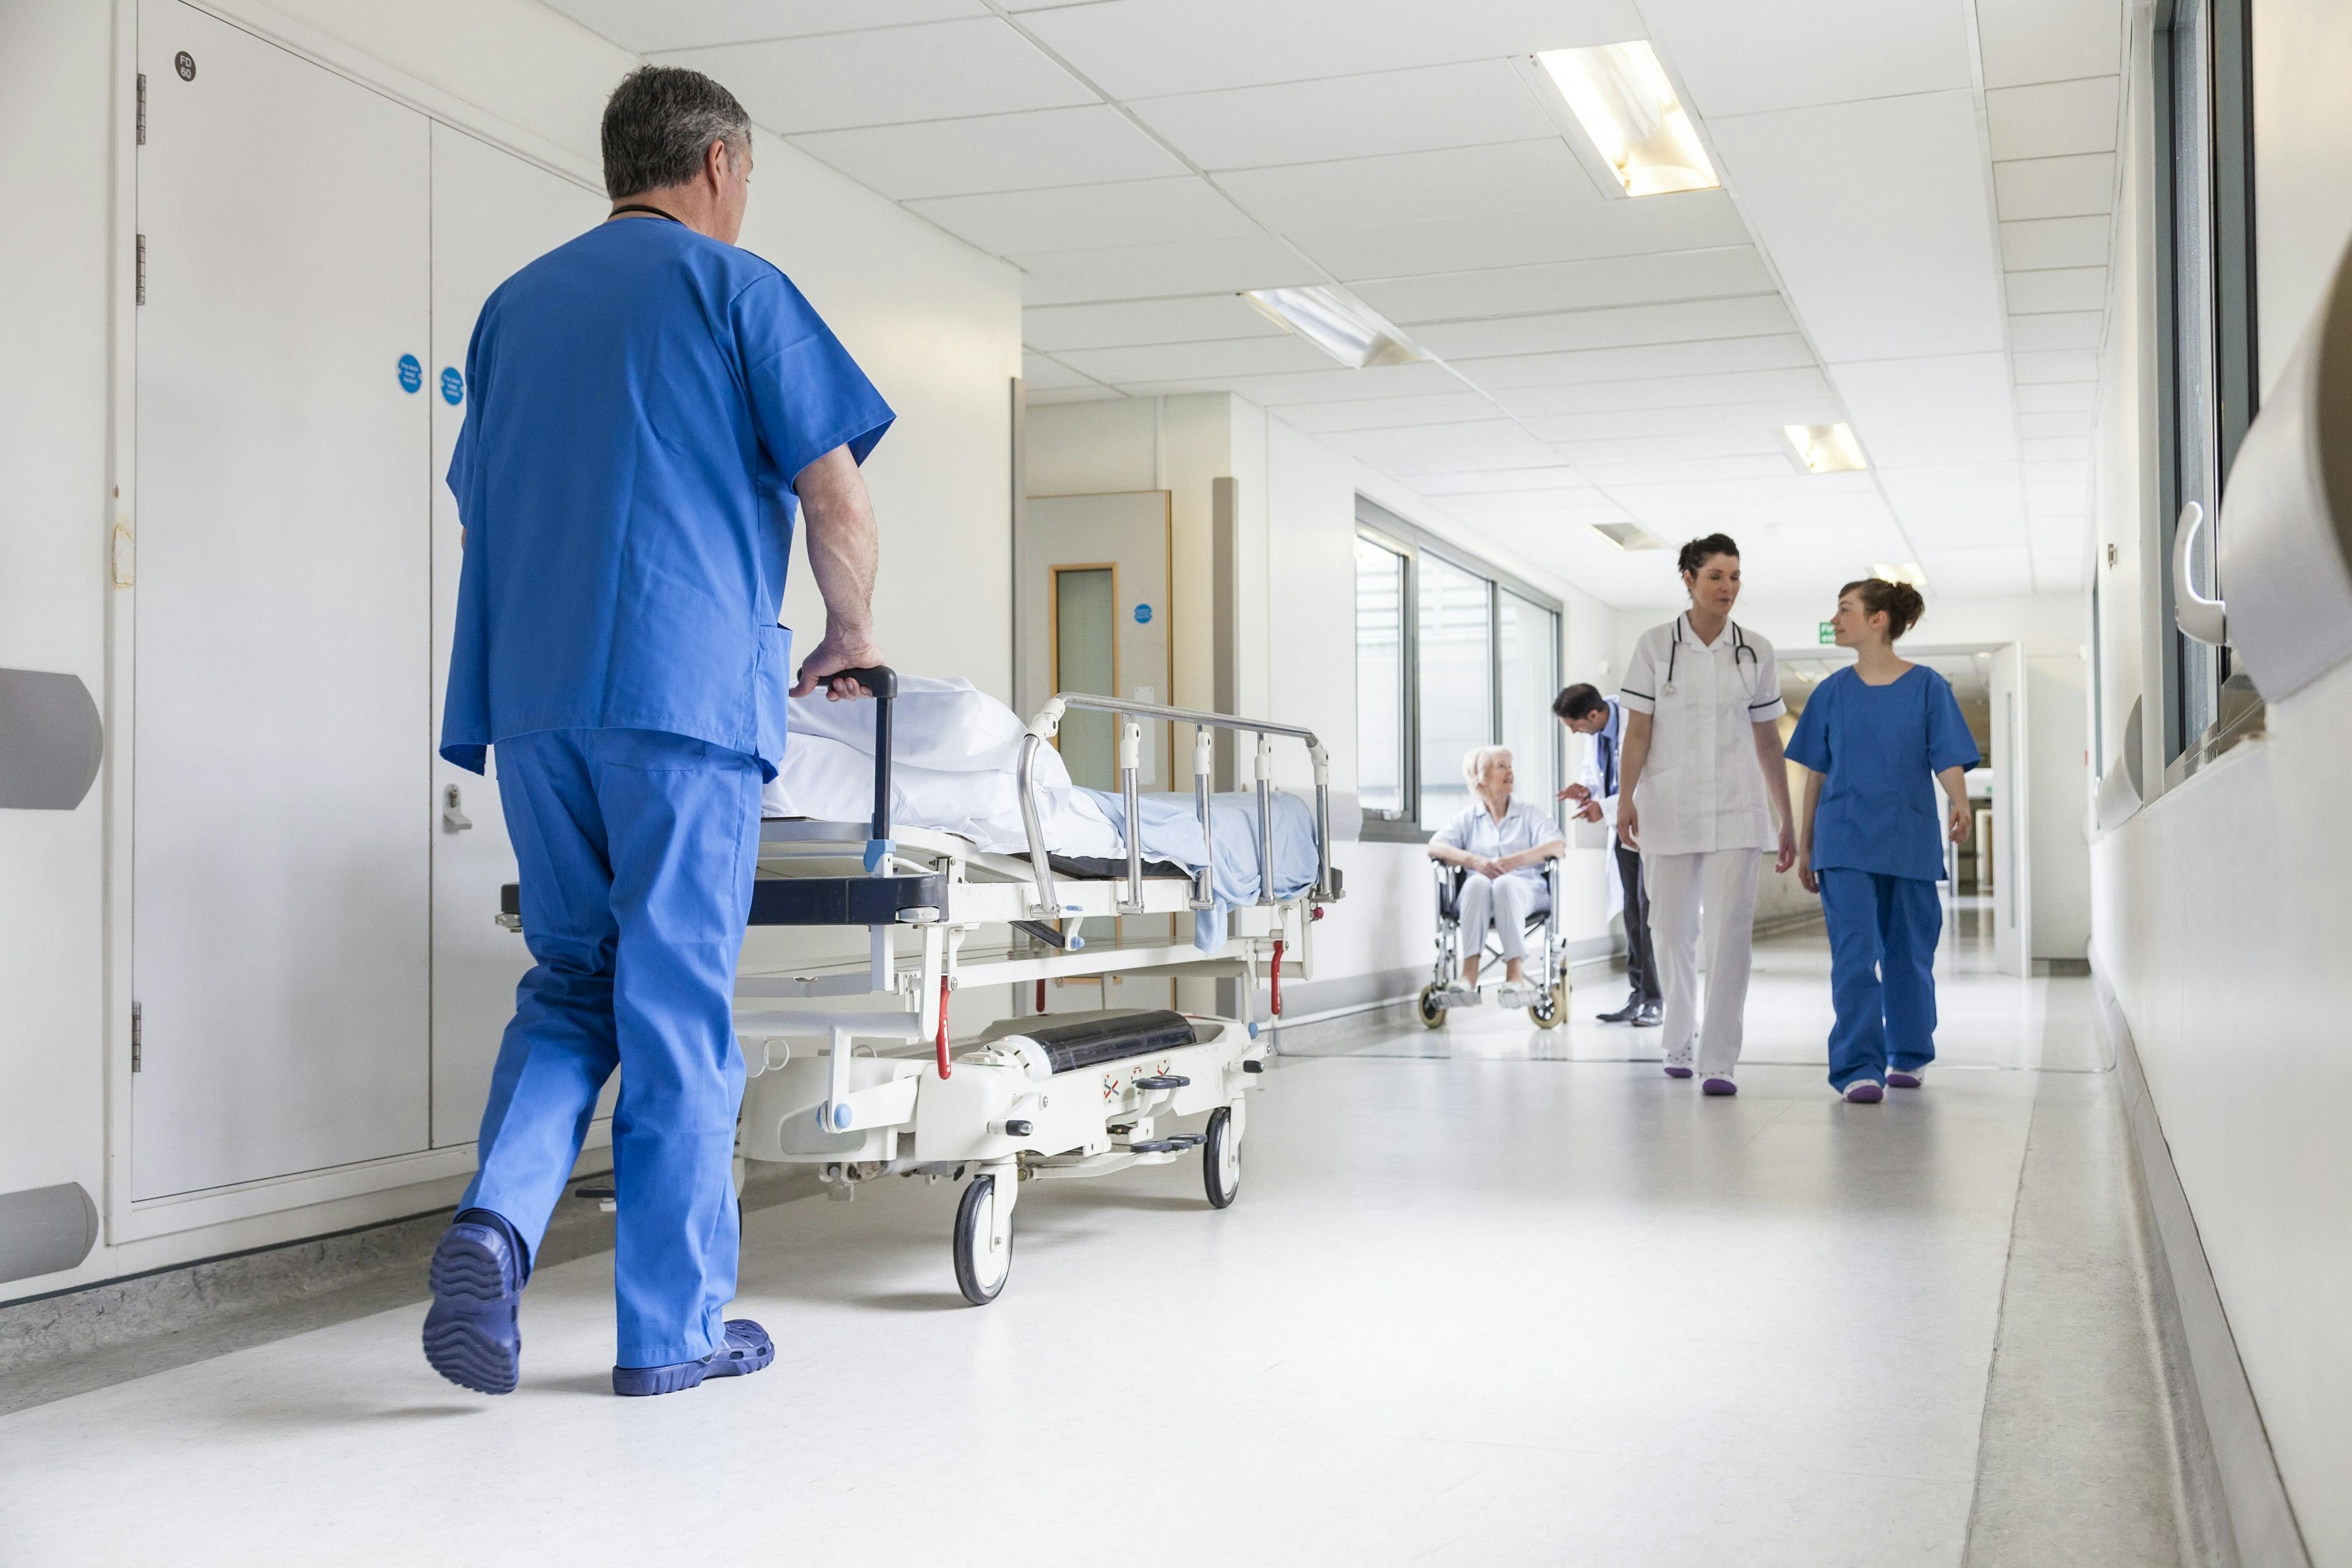 Study: Hospital acquisitions hurt patient experience